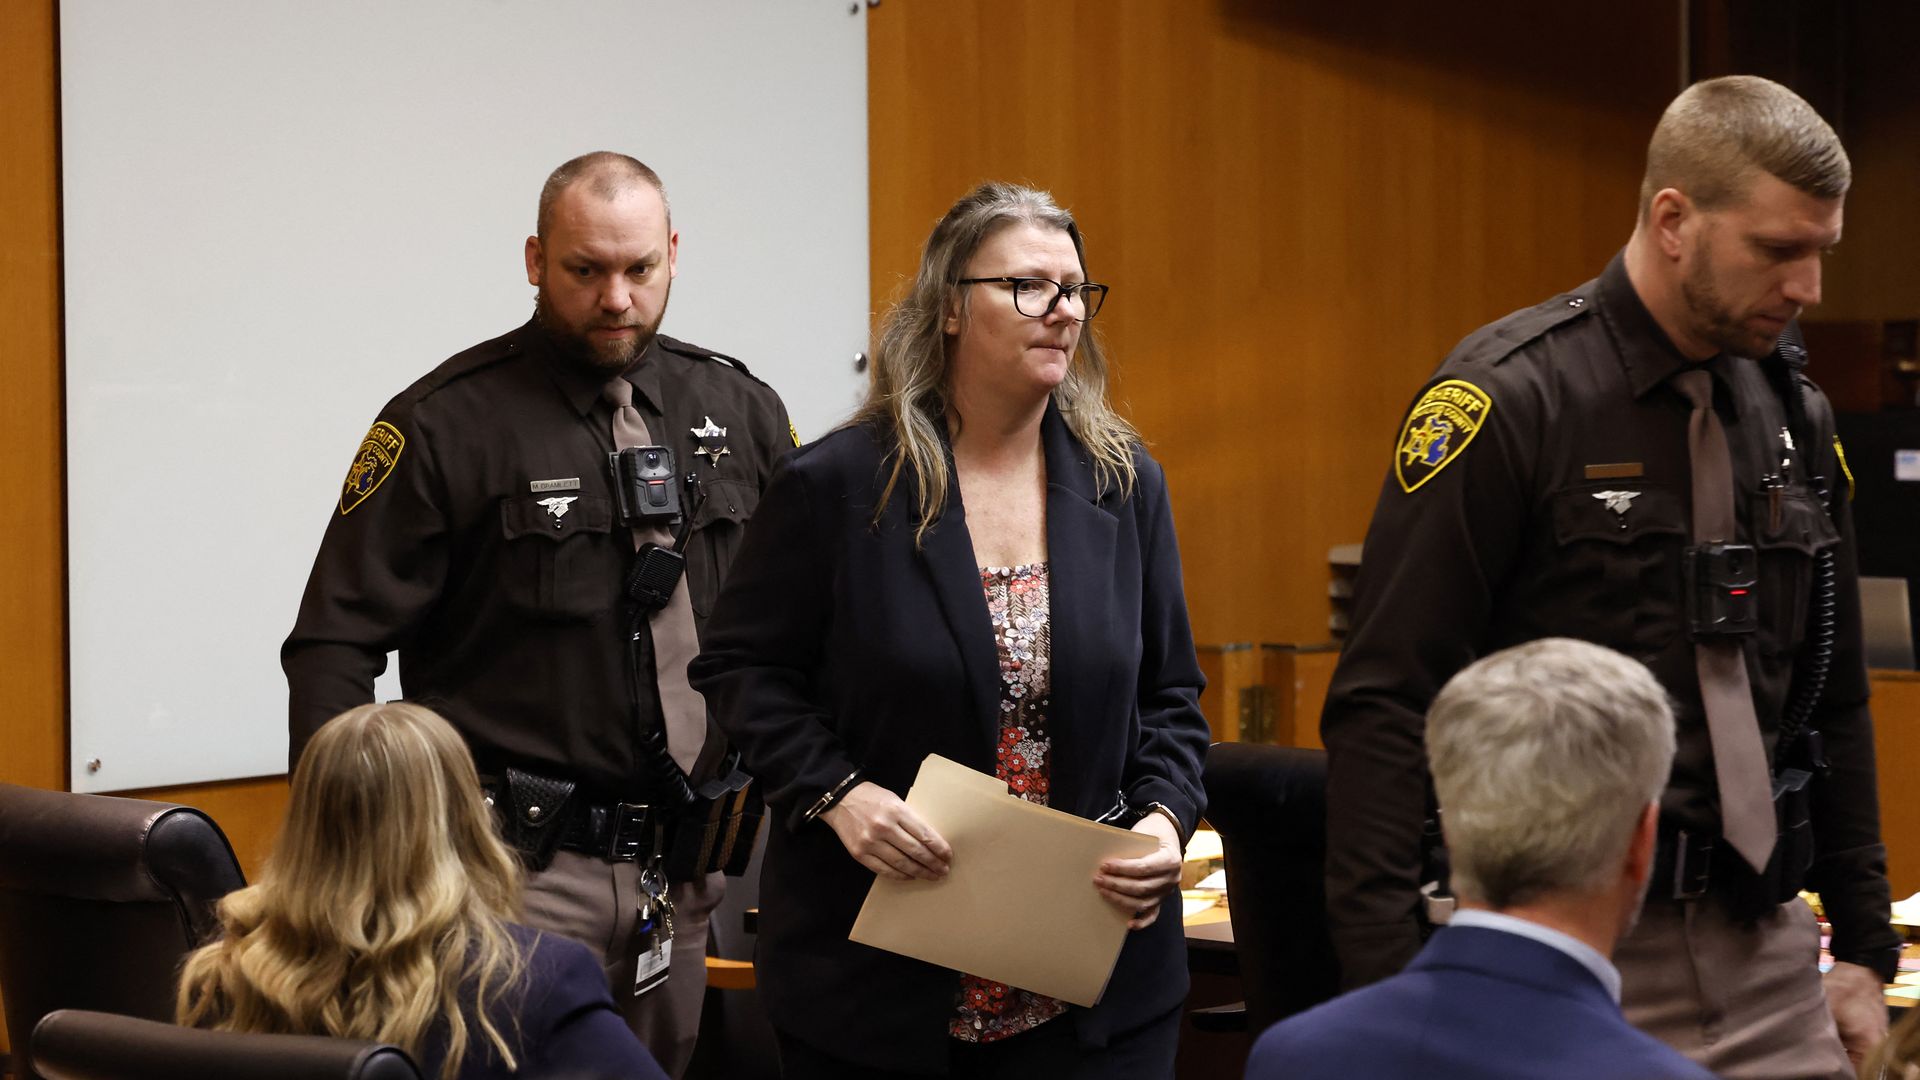 Jennifer Crumbley, 43, the mother of accused Oxford High School gunman Ethan Crumbley exits the courtroom of Oakland County Court in Pontiac, Michigan during a break in her trial 